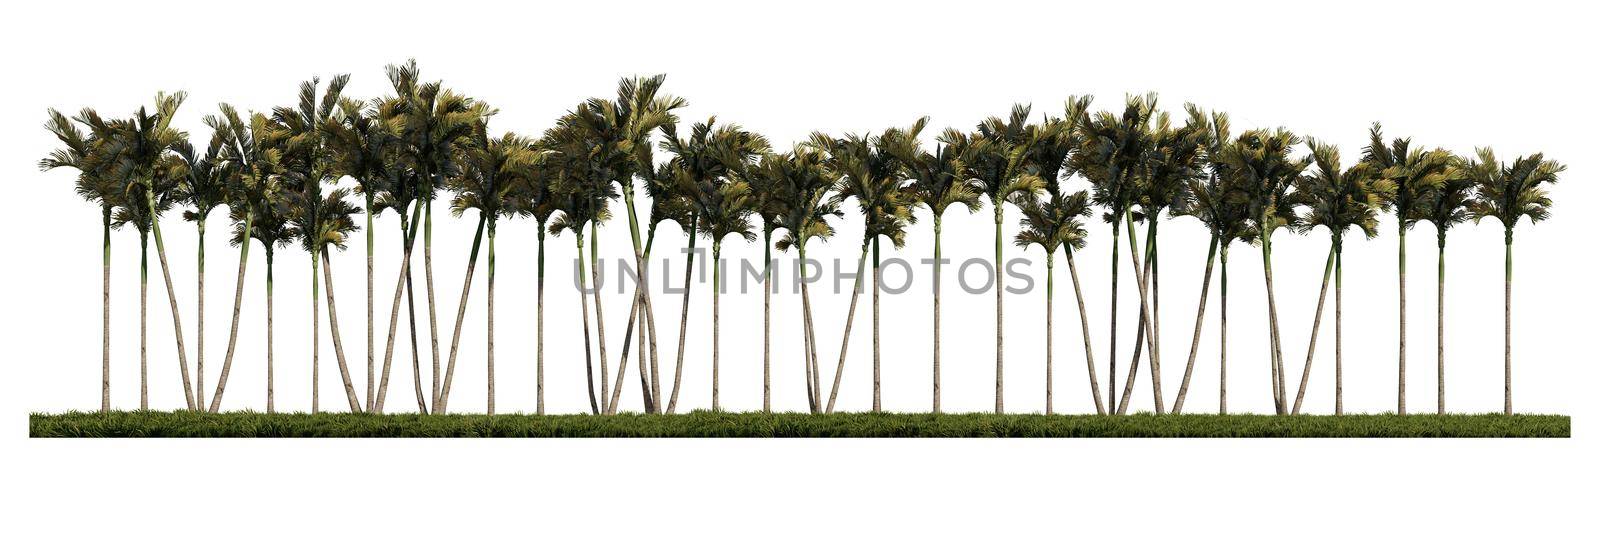 3ds rendering image of front view of palm trees on grasses field. by Kankliang